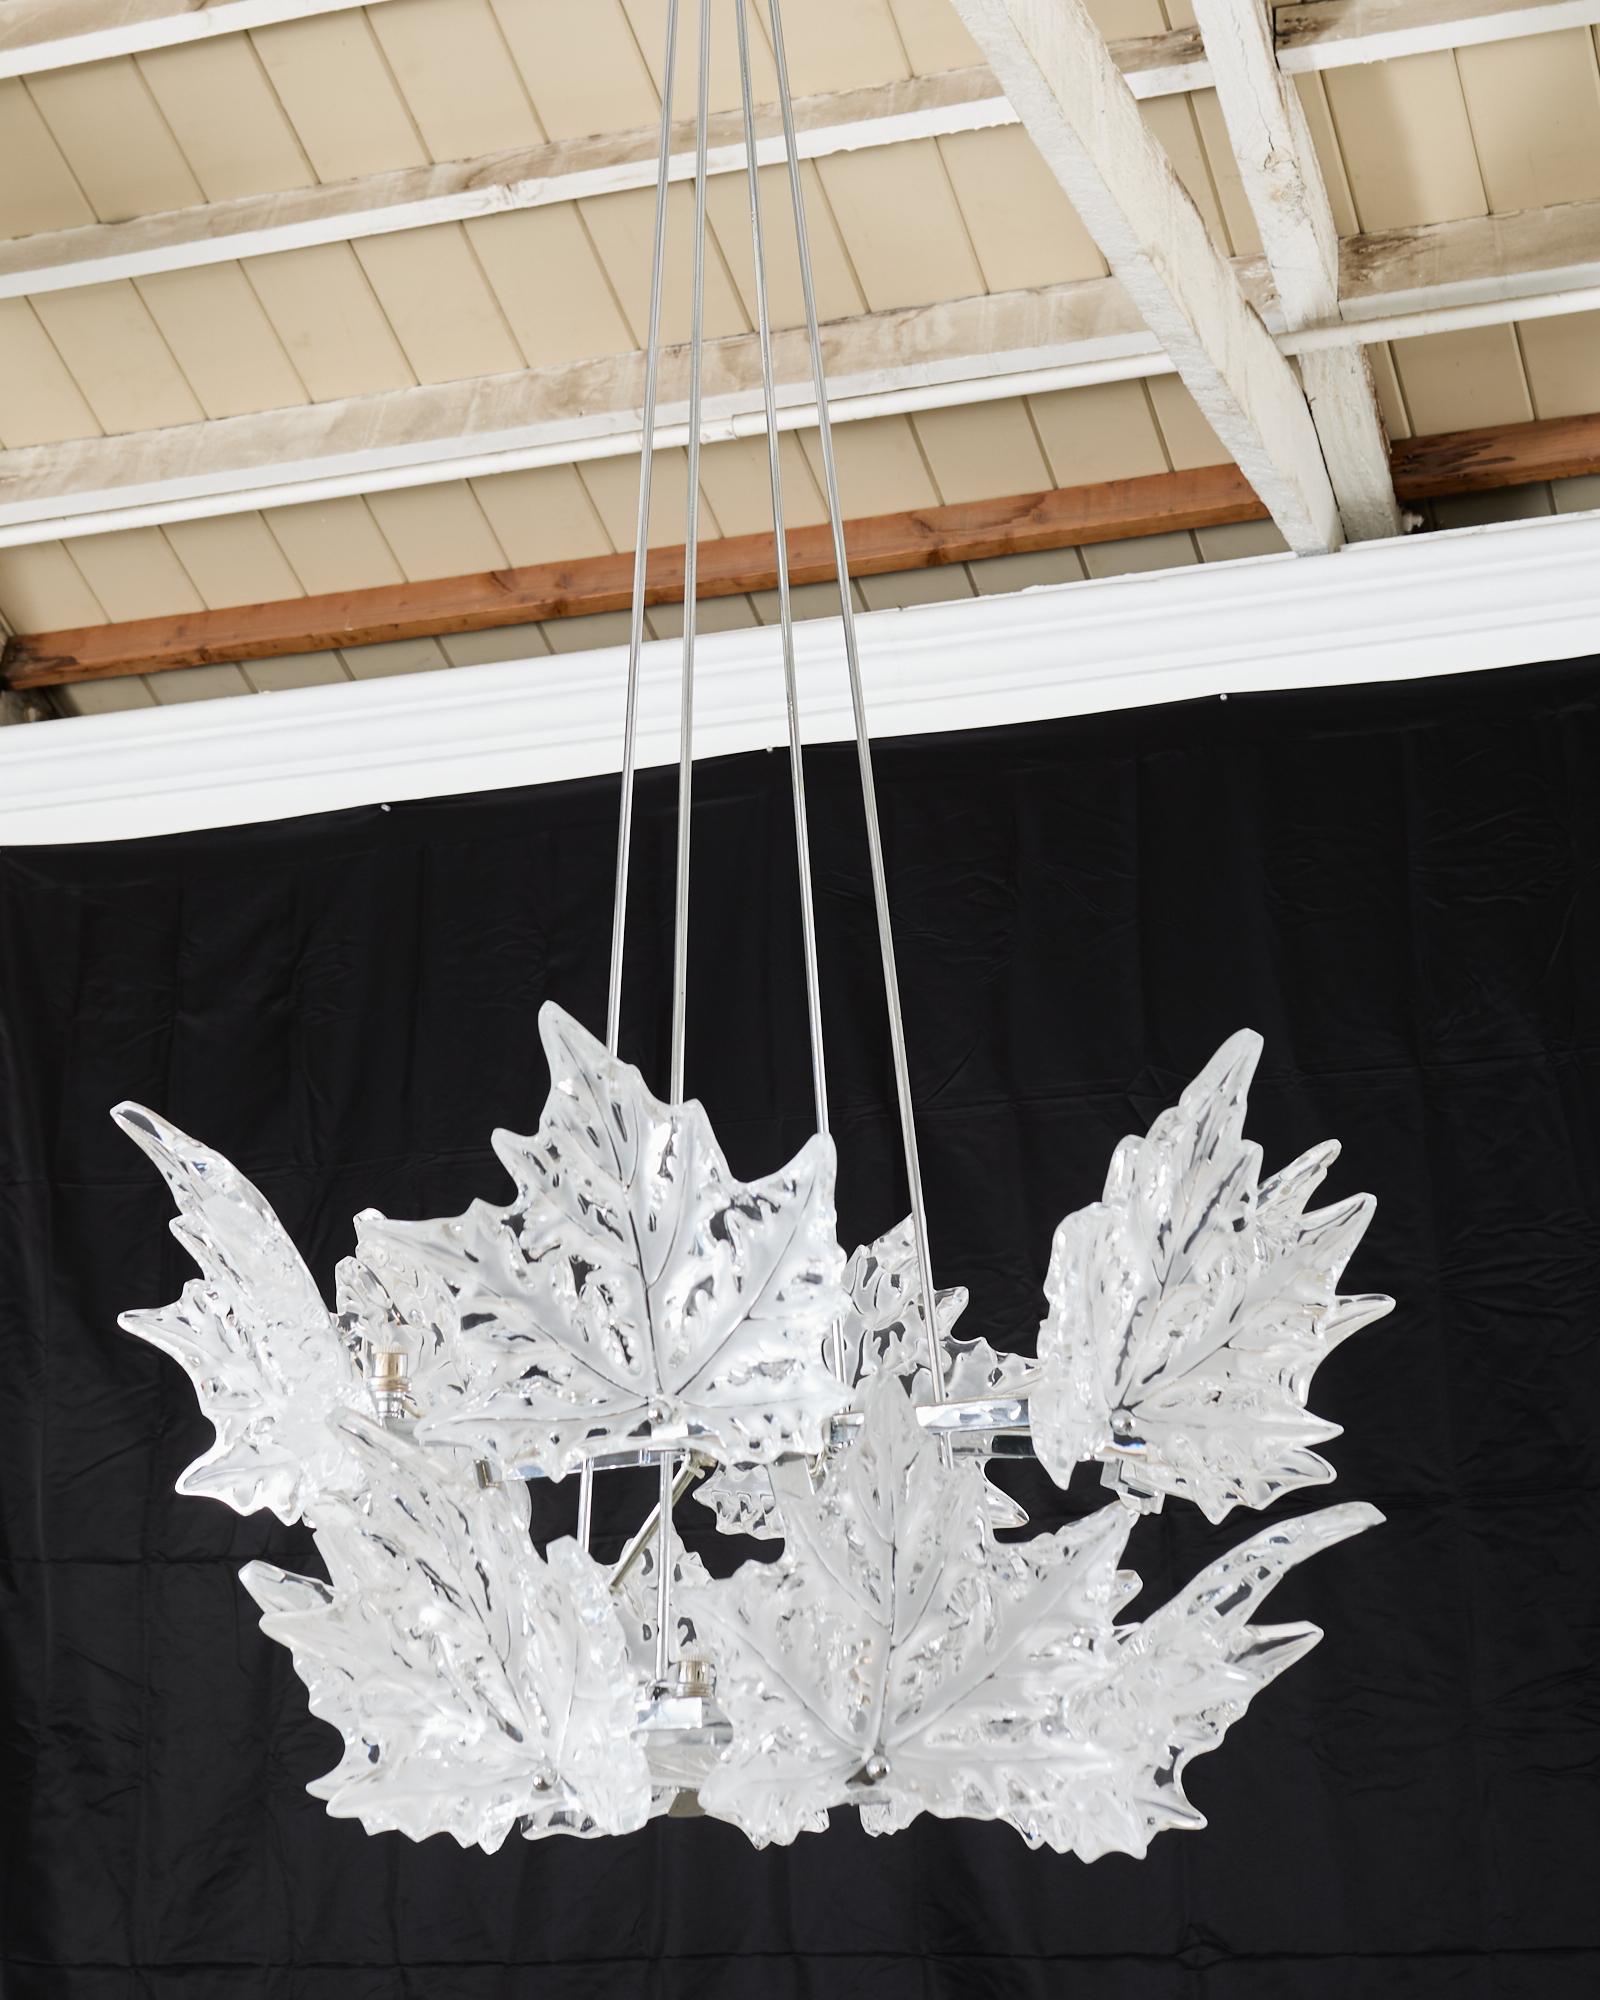 Sublime French 2 tier chandelier by René Lalique. The 